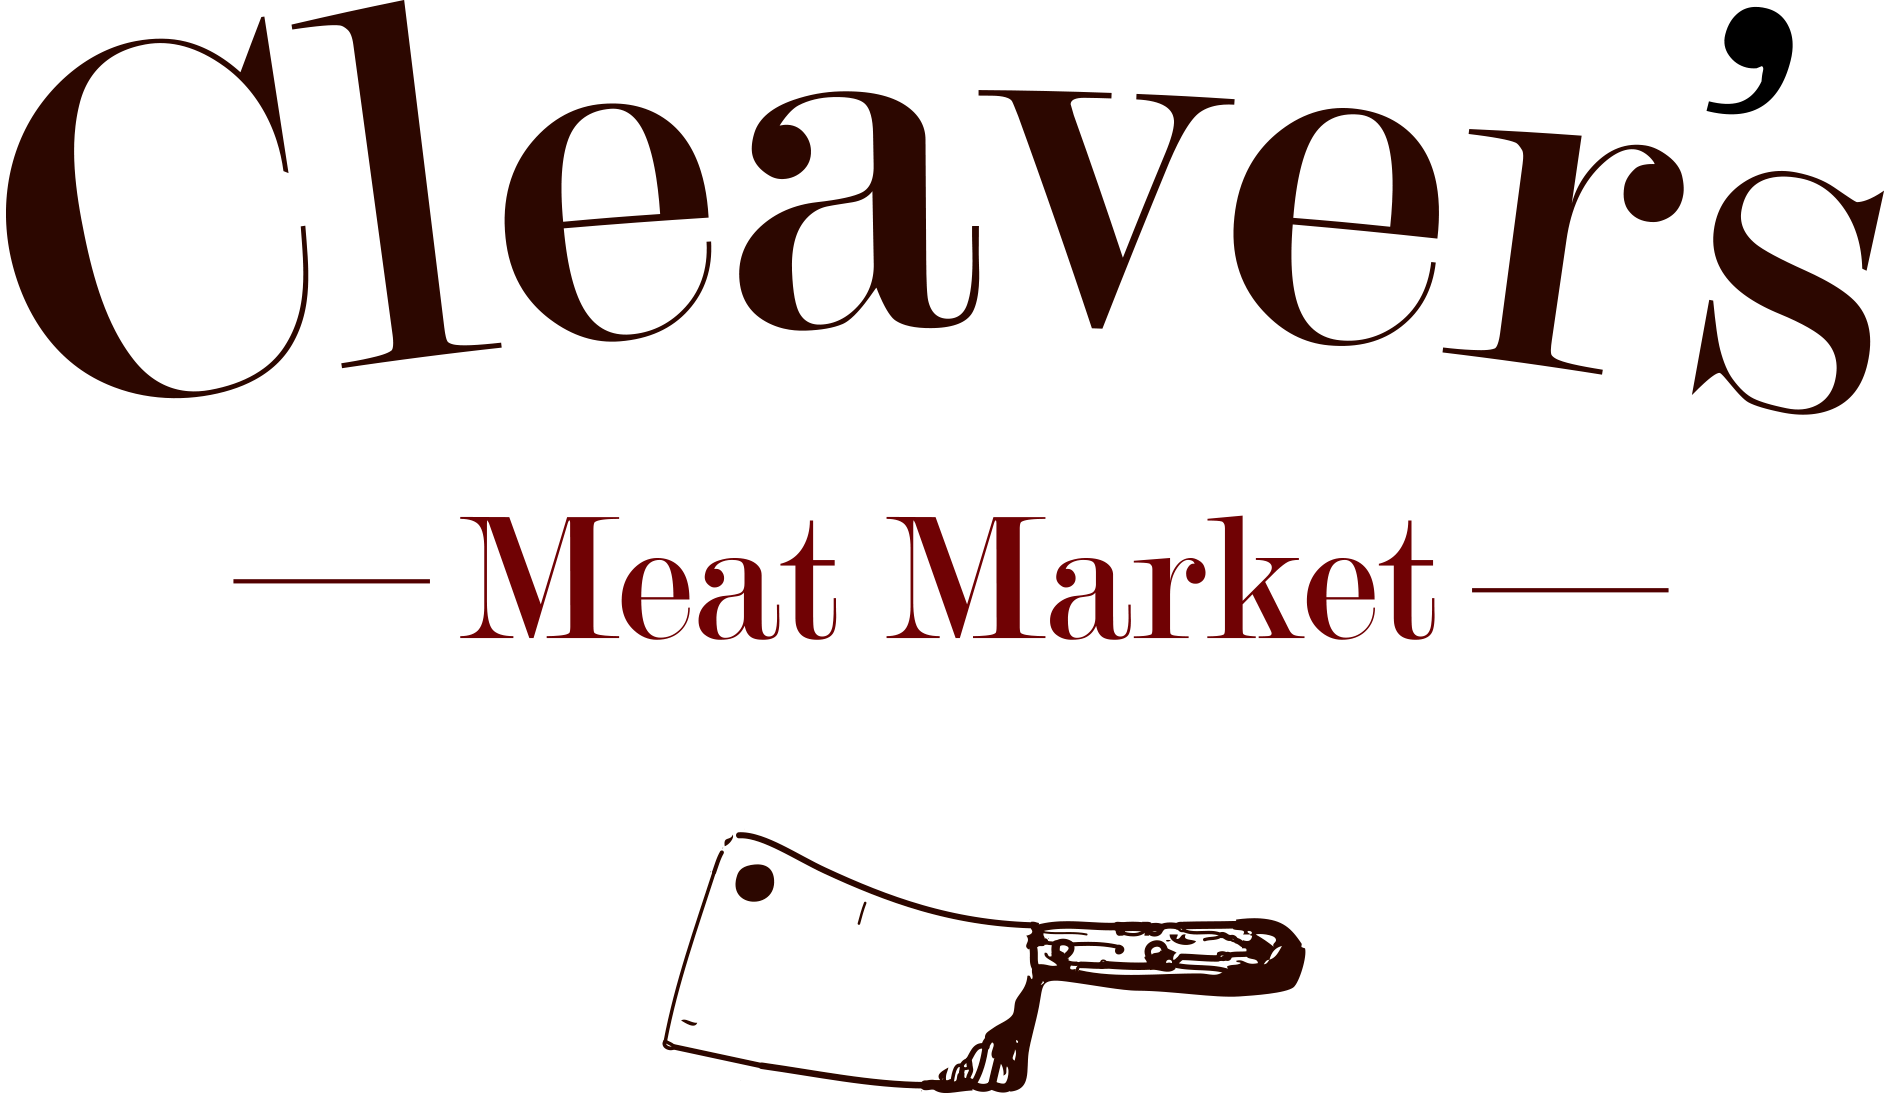 Cleaver&#39;s Meat Market